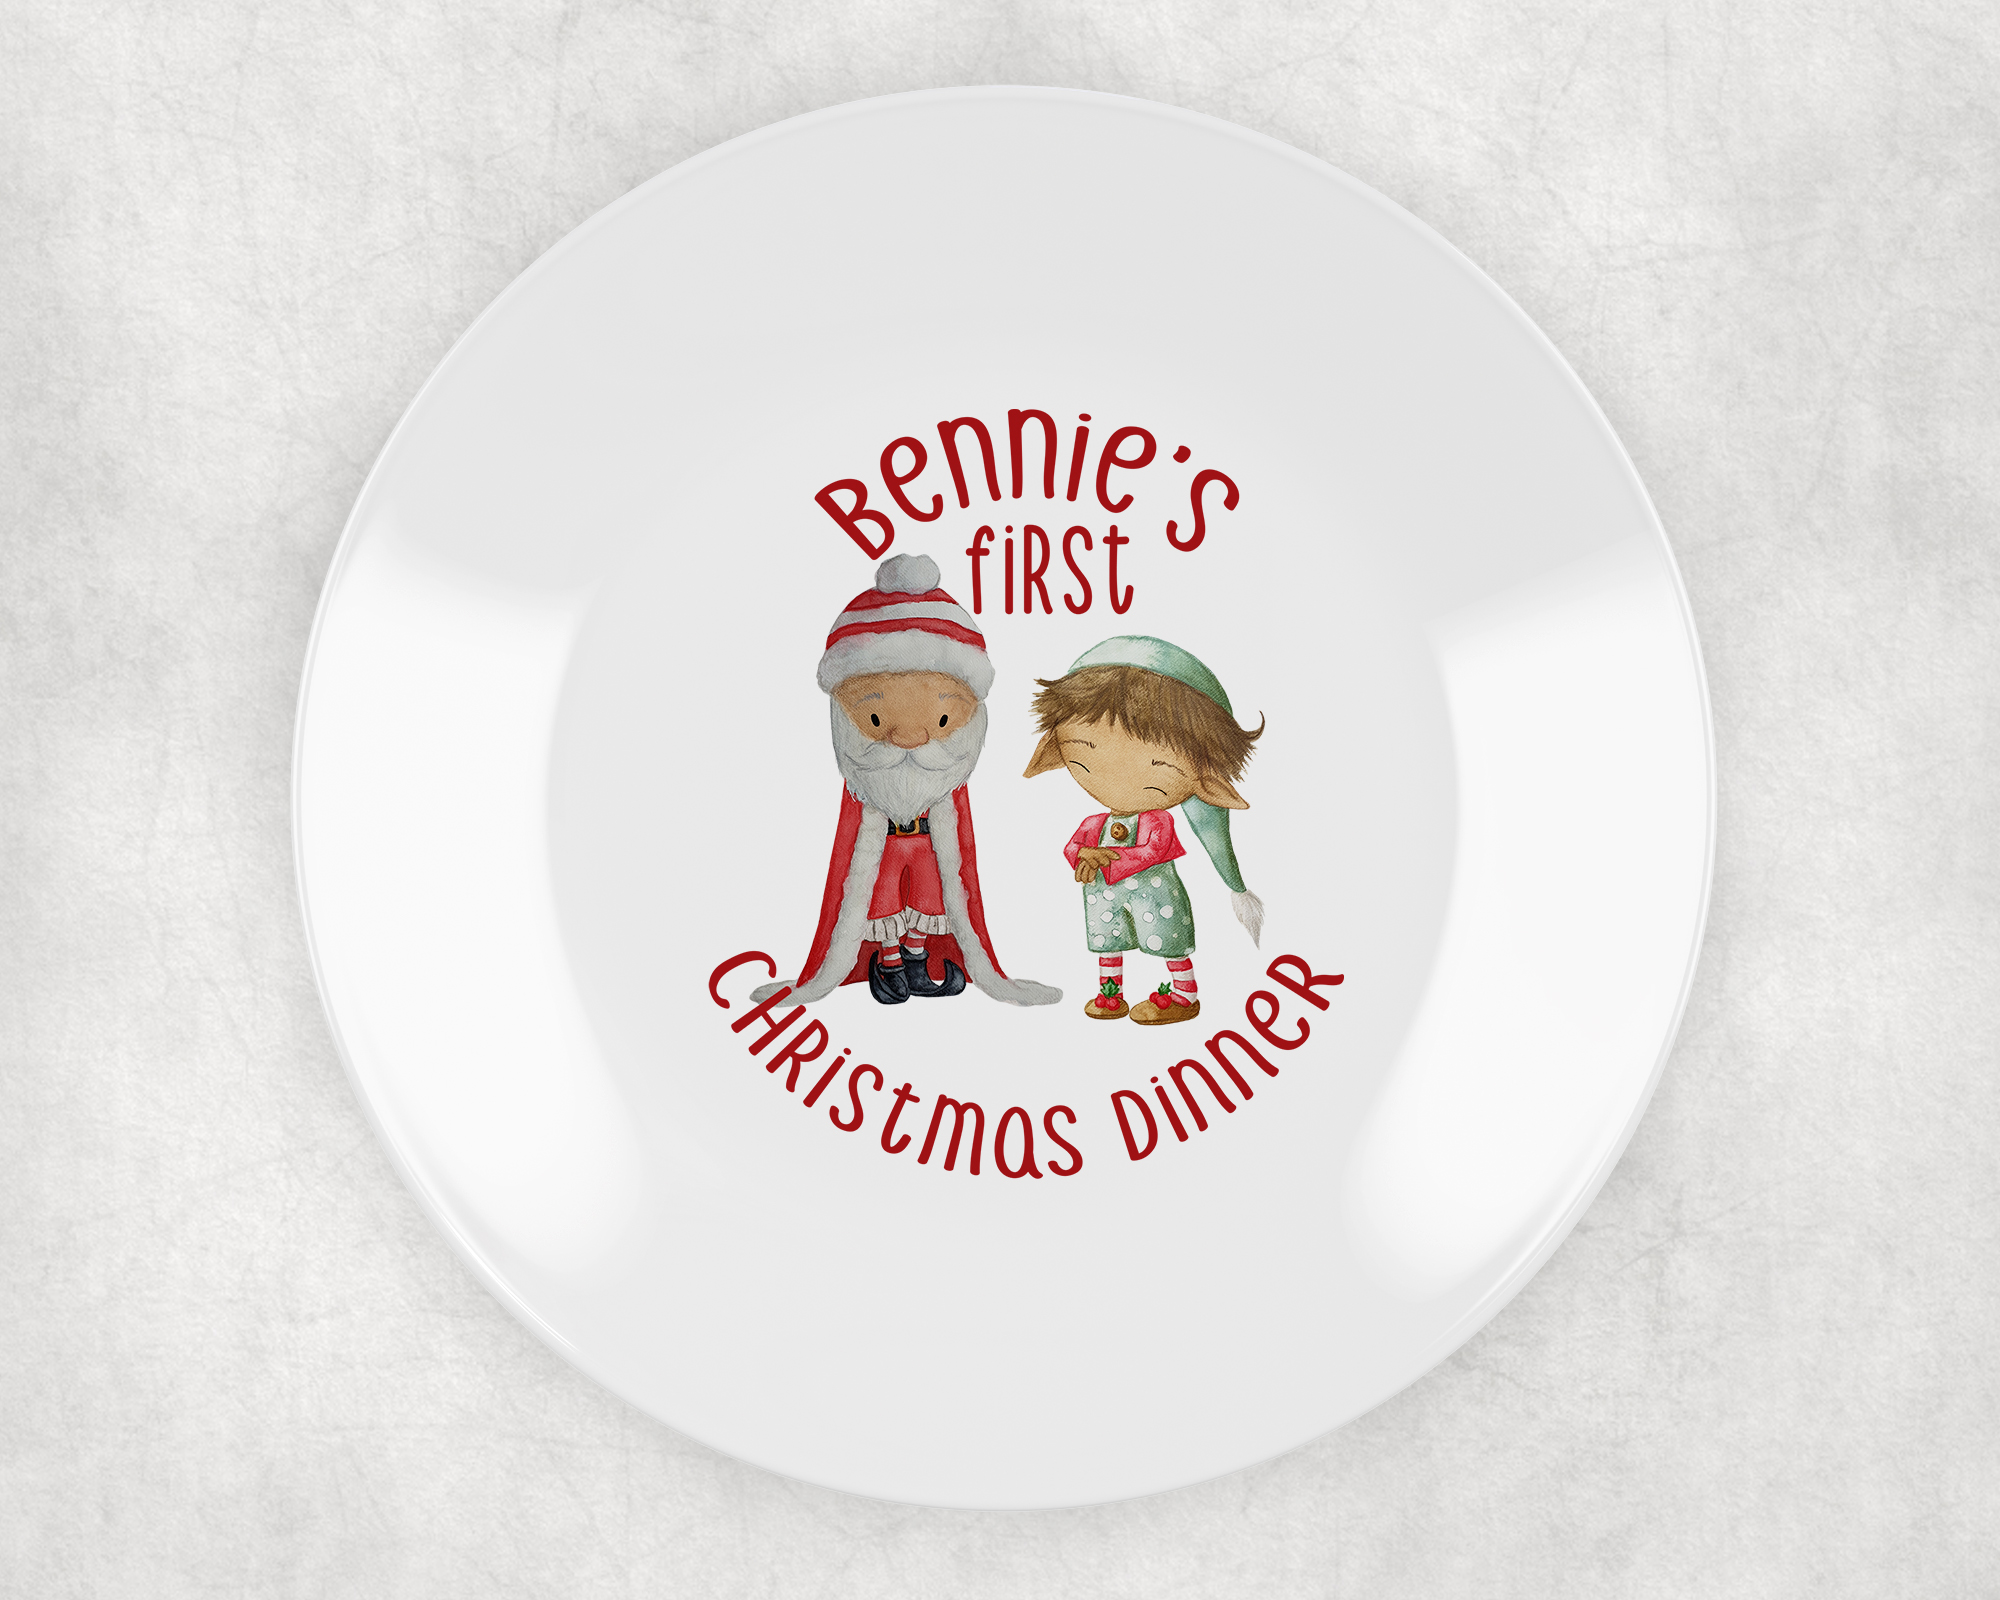 my first christmas plate personalised with santa and elf. ideal plastic non breakable plate. santa boy elf brown hair no background